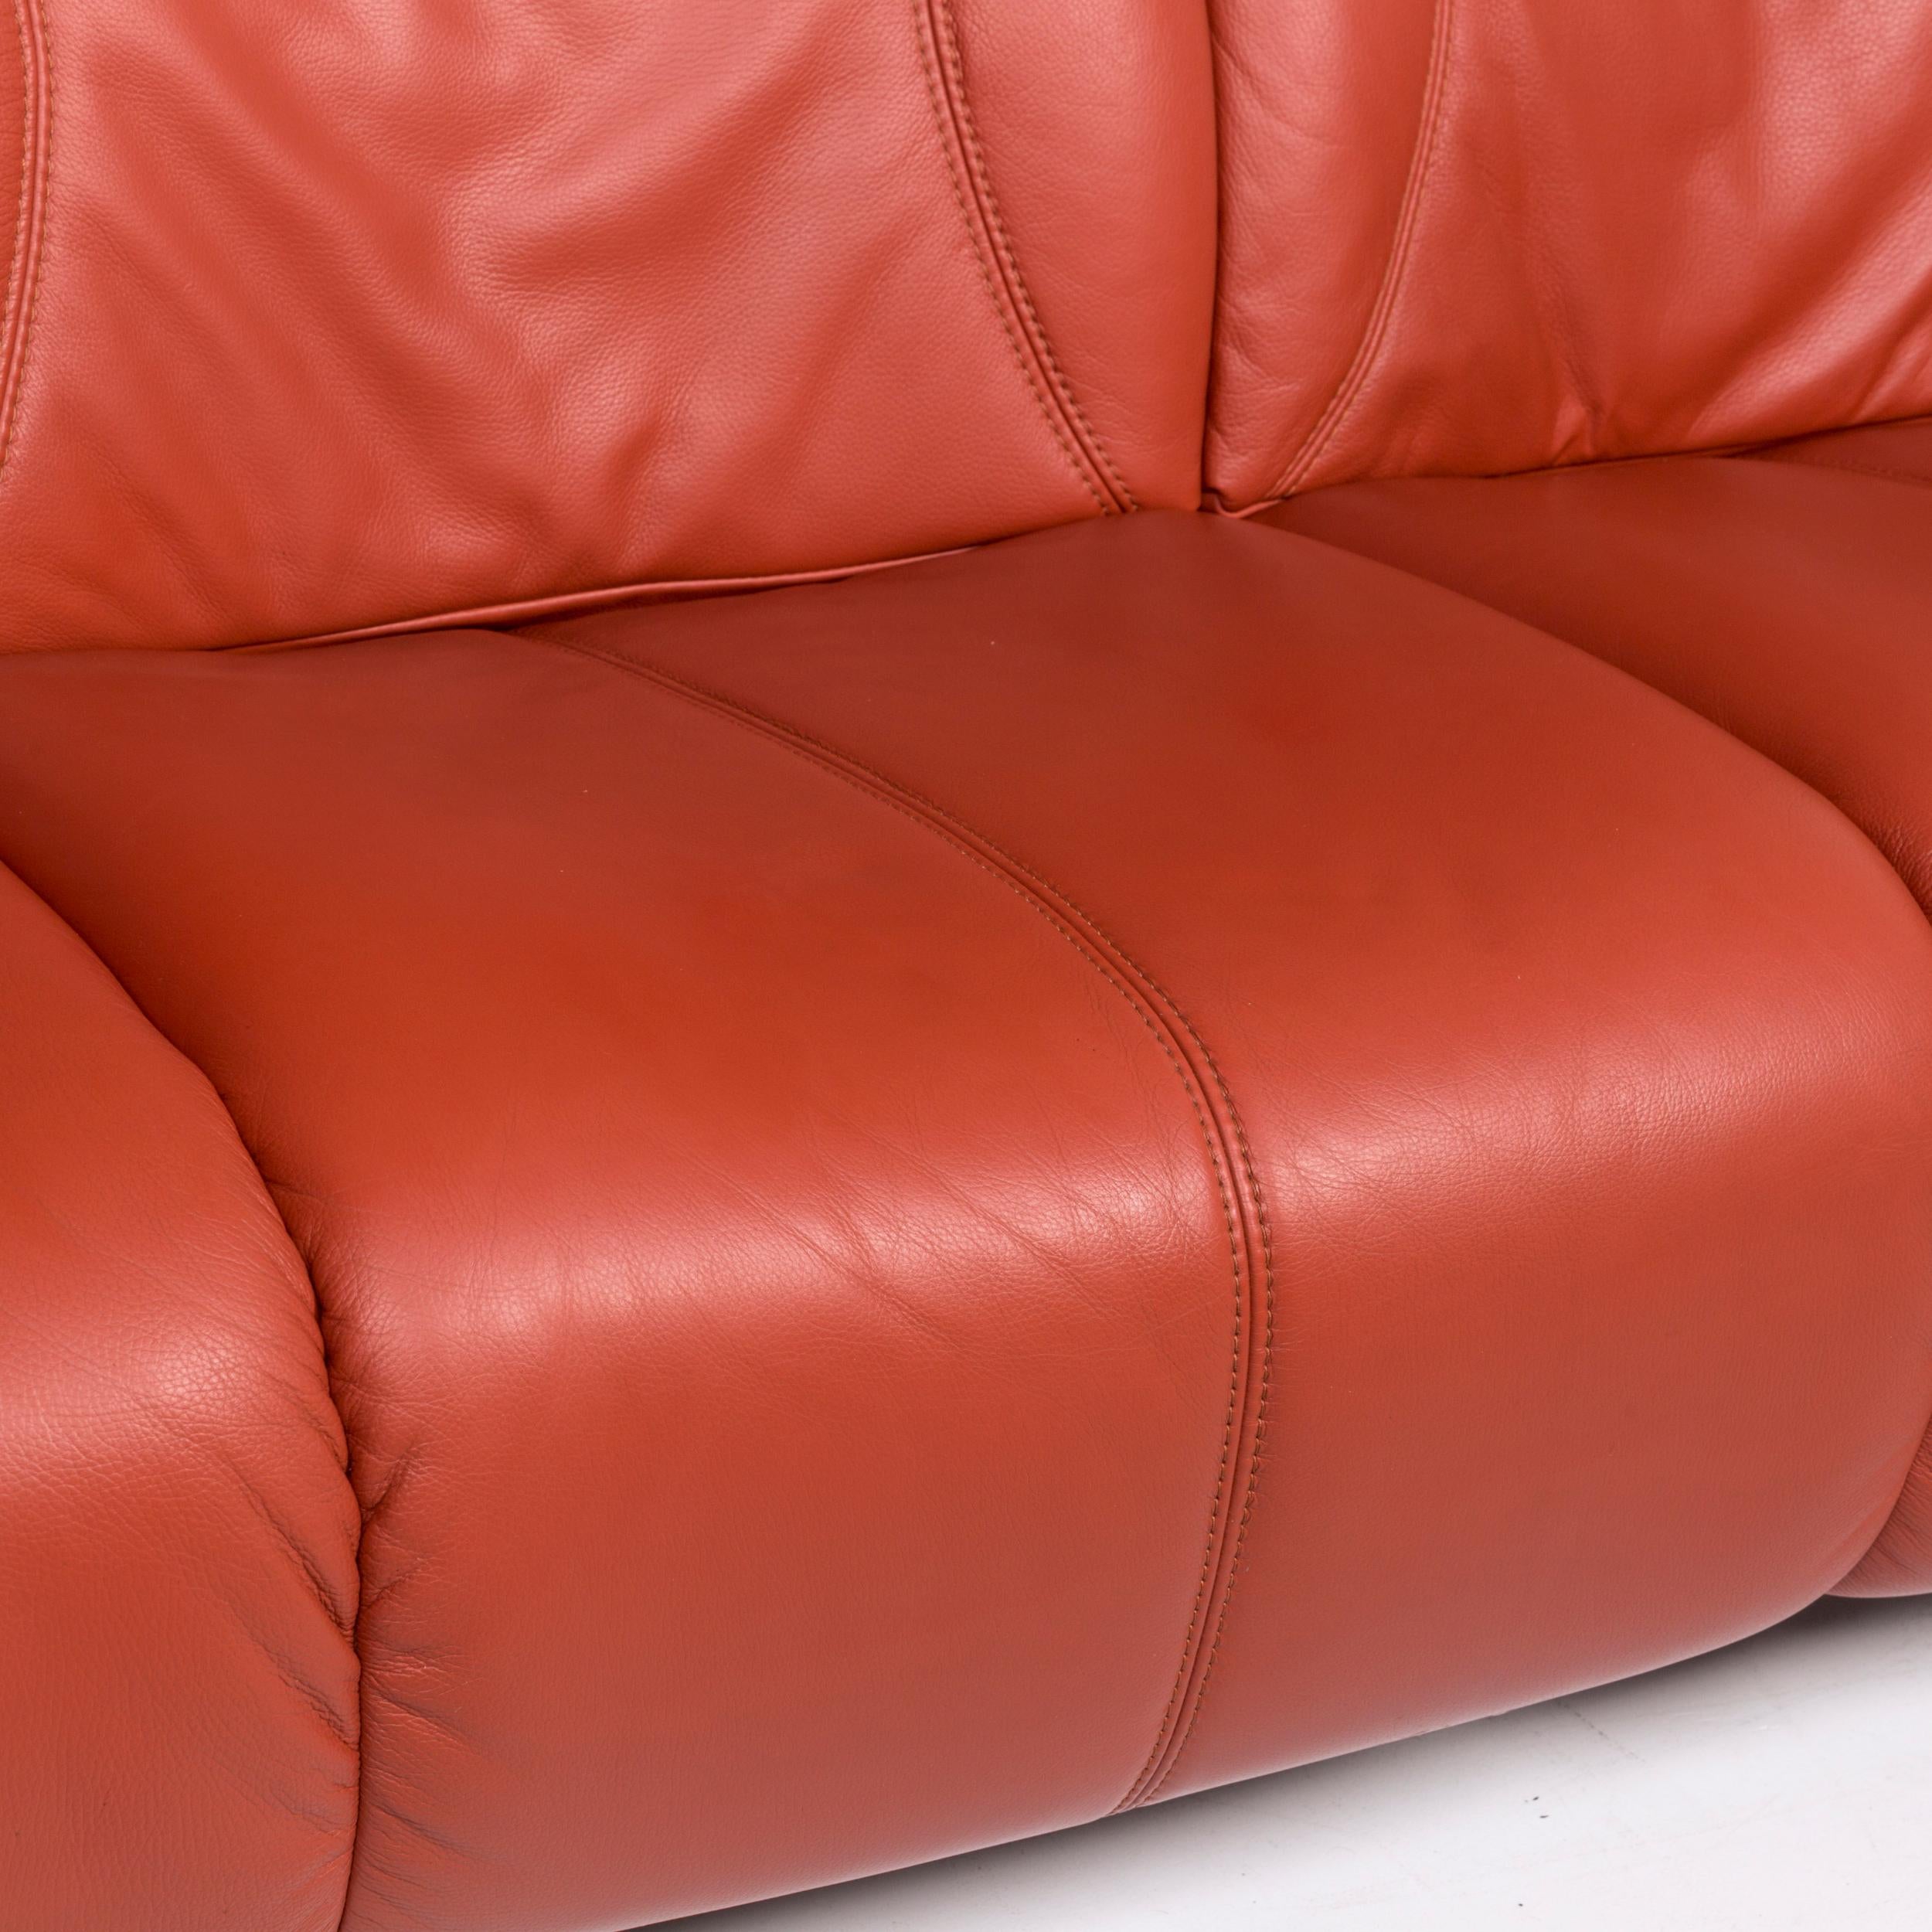 We bring to you a Himolla Windsor leather sofa red three-seat couch.

 

 Product measurements in centimeters:
 

Depth 83
Width 202
Height 104
Seat-height 43
Rest-height 61
Seat-depth 52
Seat-width 168
Back-height 65.